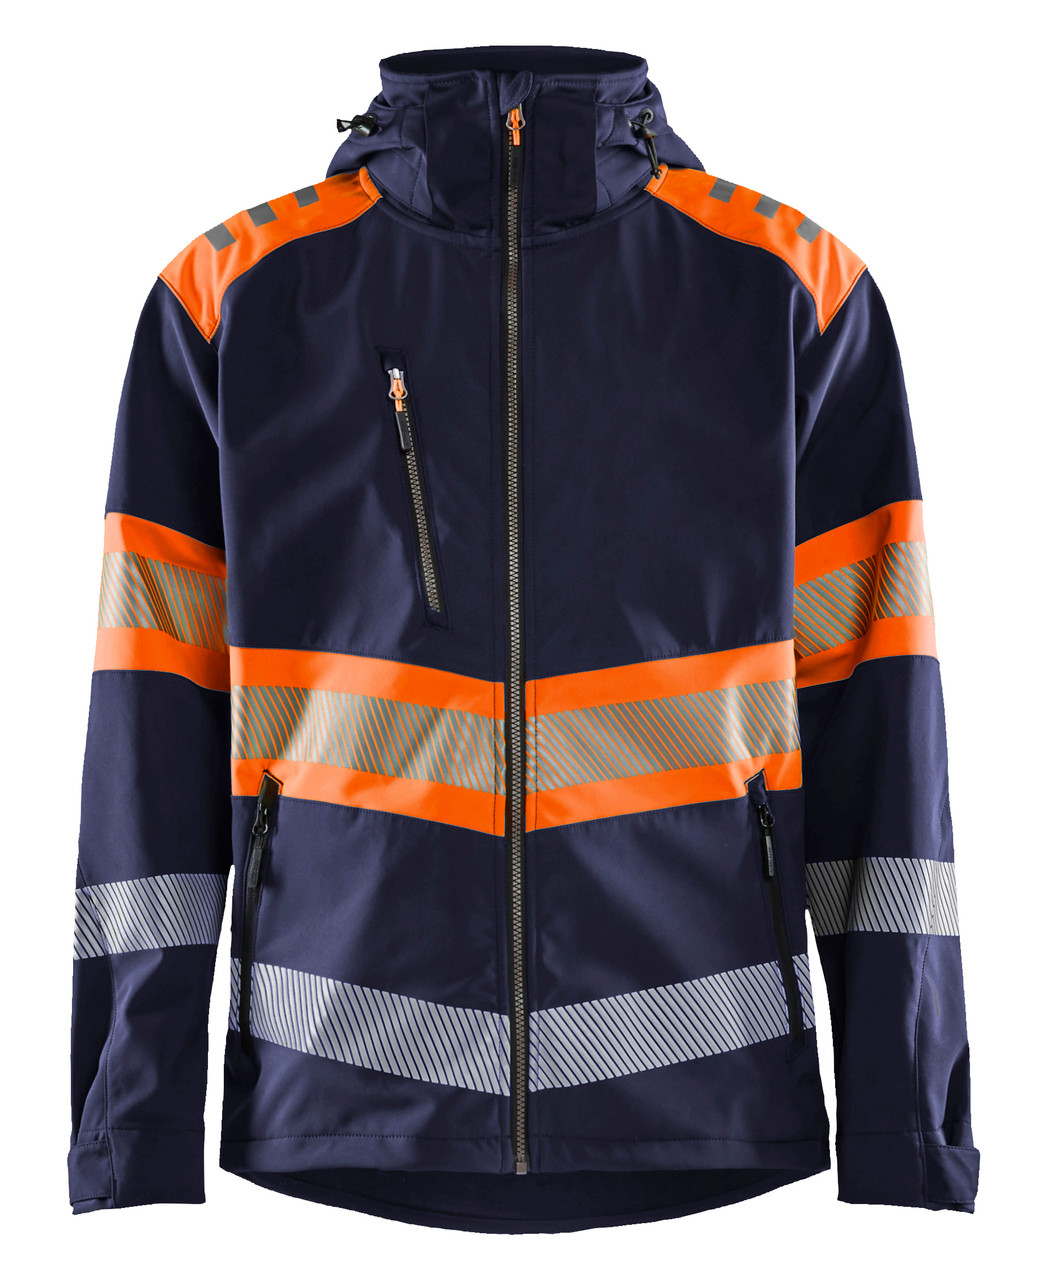 BLAKLADER Jacket  4494  with  for BLAKLADER Jacket  | 4494 Mens Navy Blue / High Vis Orange Full Zip Jacket in Reflective Tape Softshell that have Full Zip  available in Australia and New Zealand